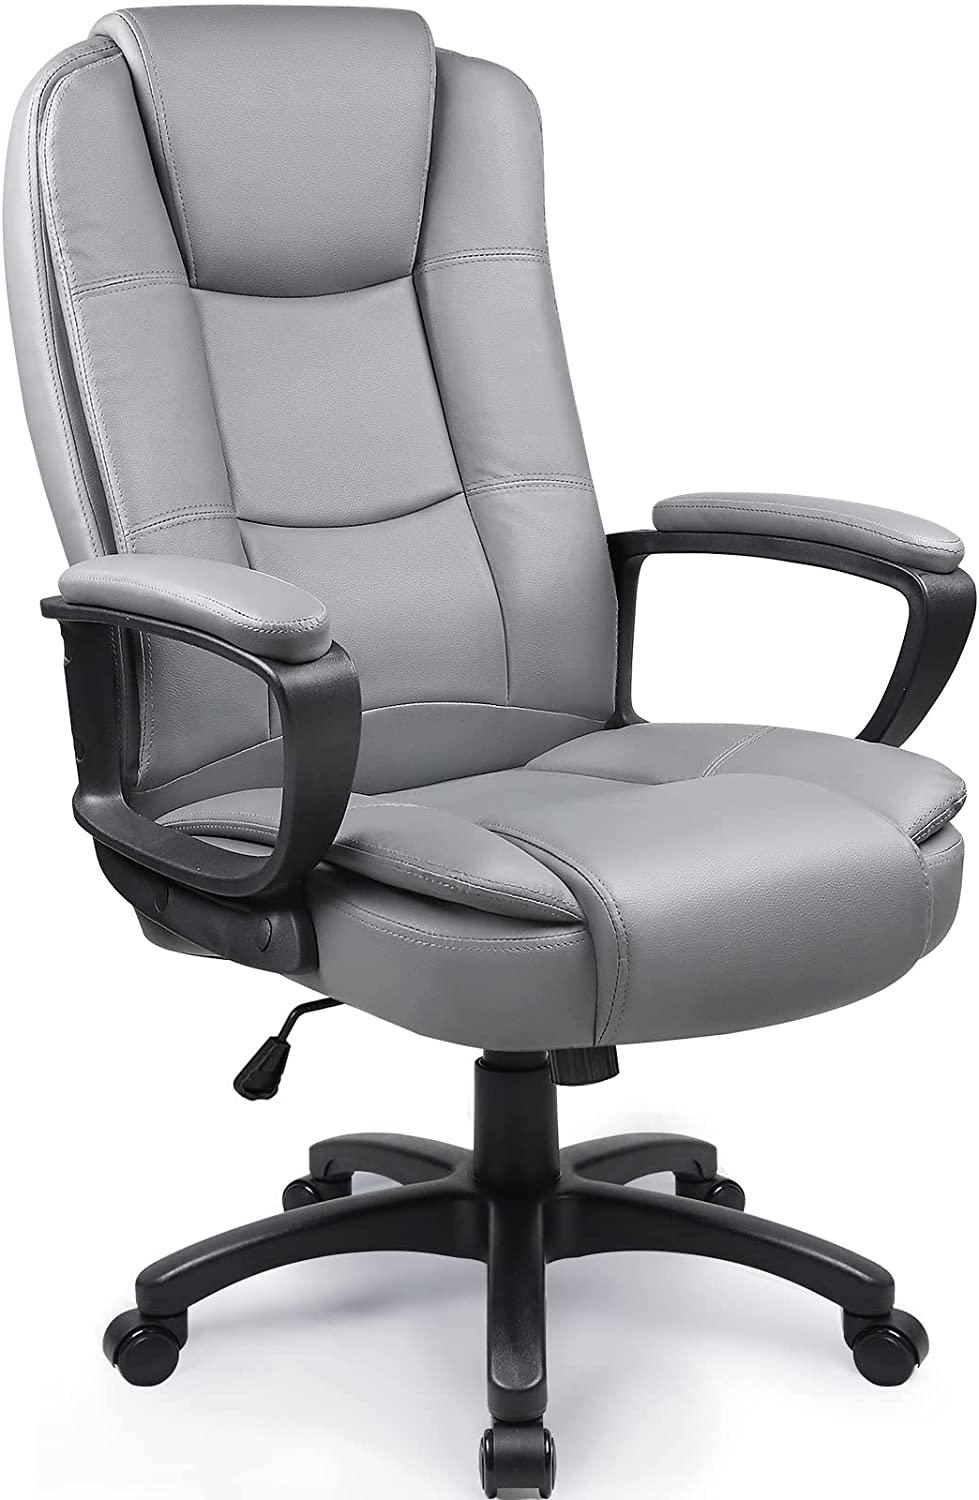 Light Gray Leather Executive Chair with Lumbar Support